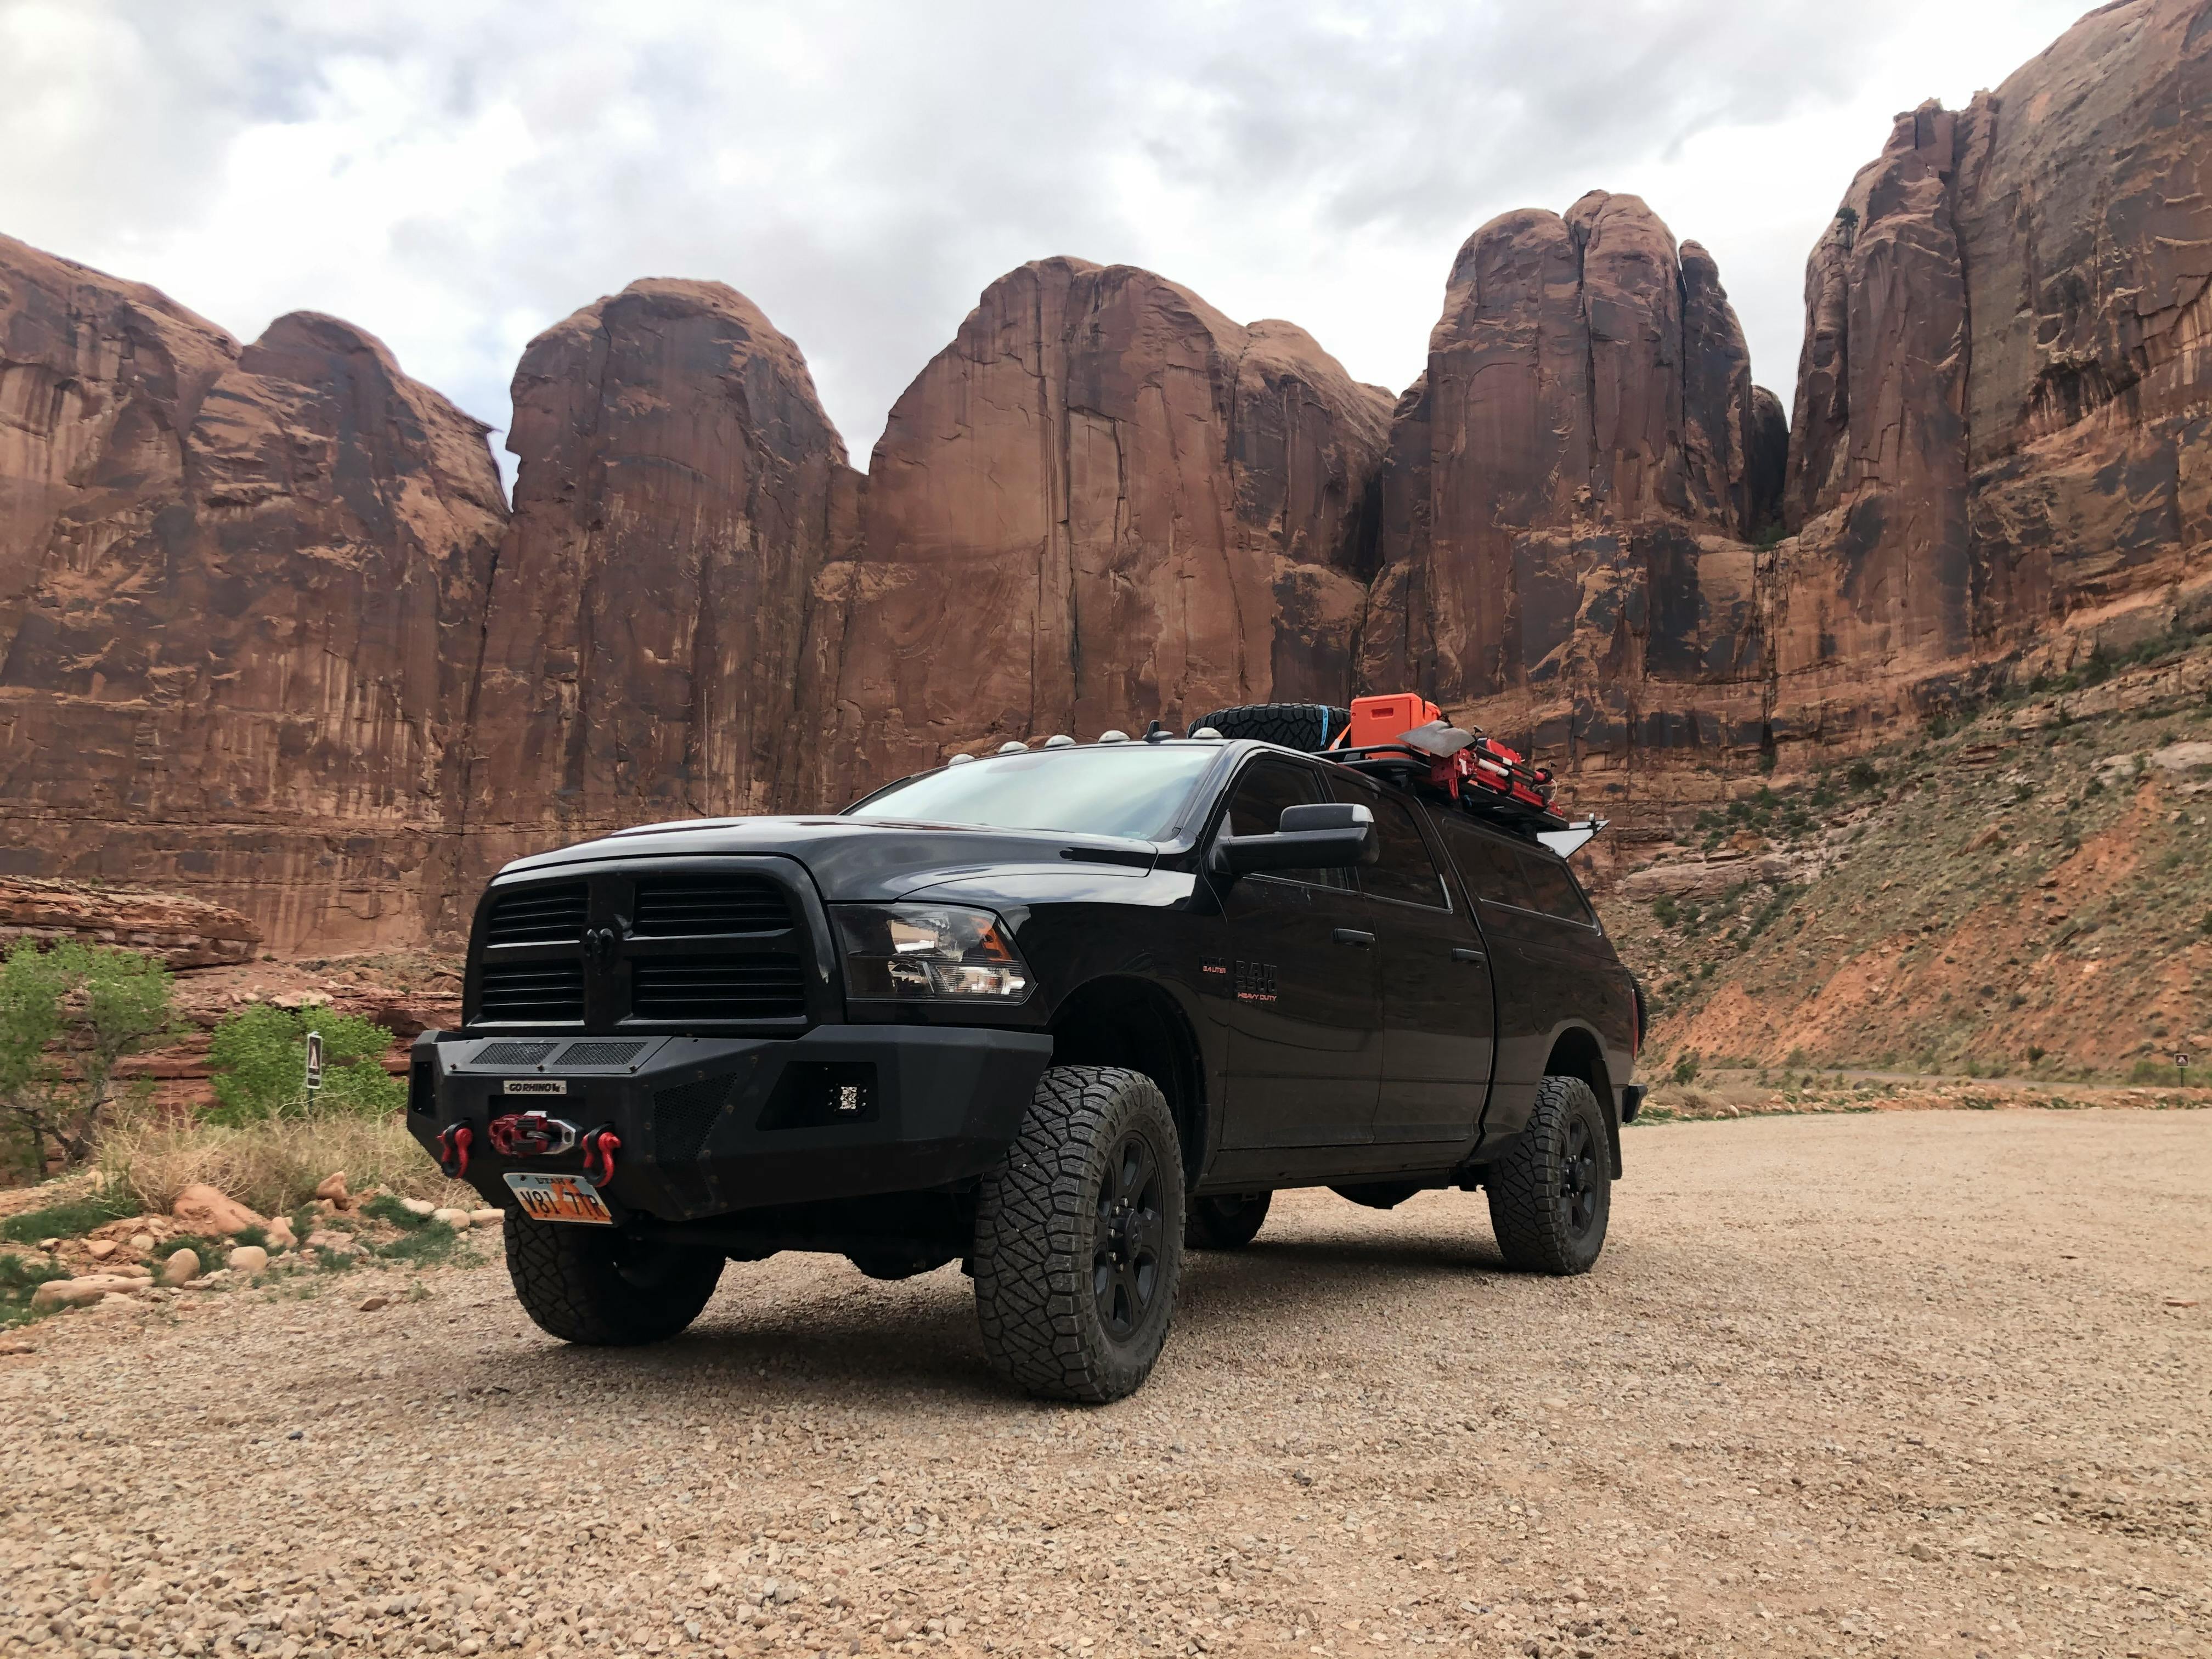 A black truck in front of some red rocks.